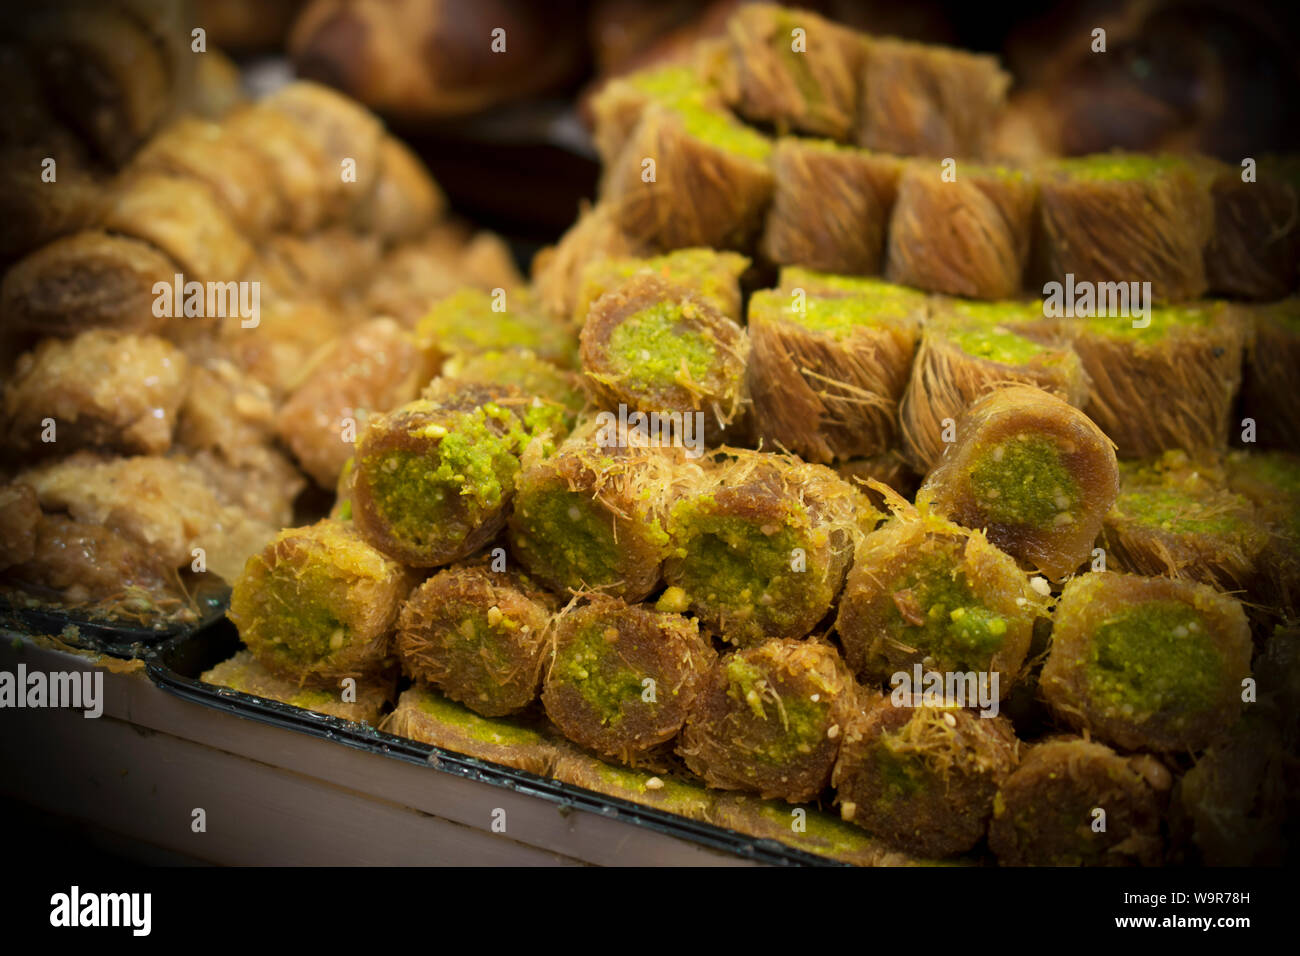 Oriental marketplace with various sweets Stock Photo